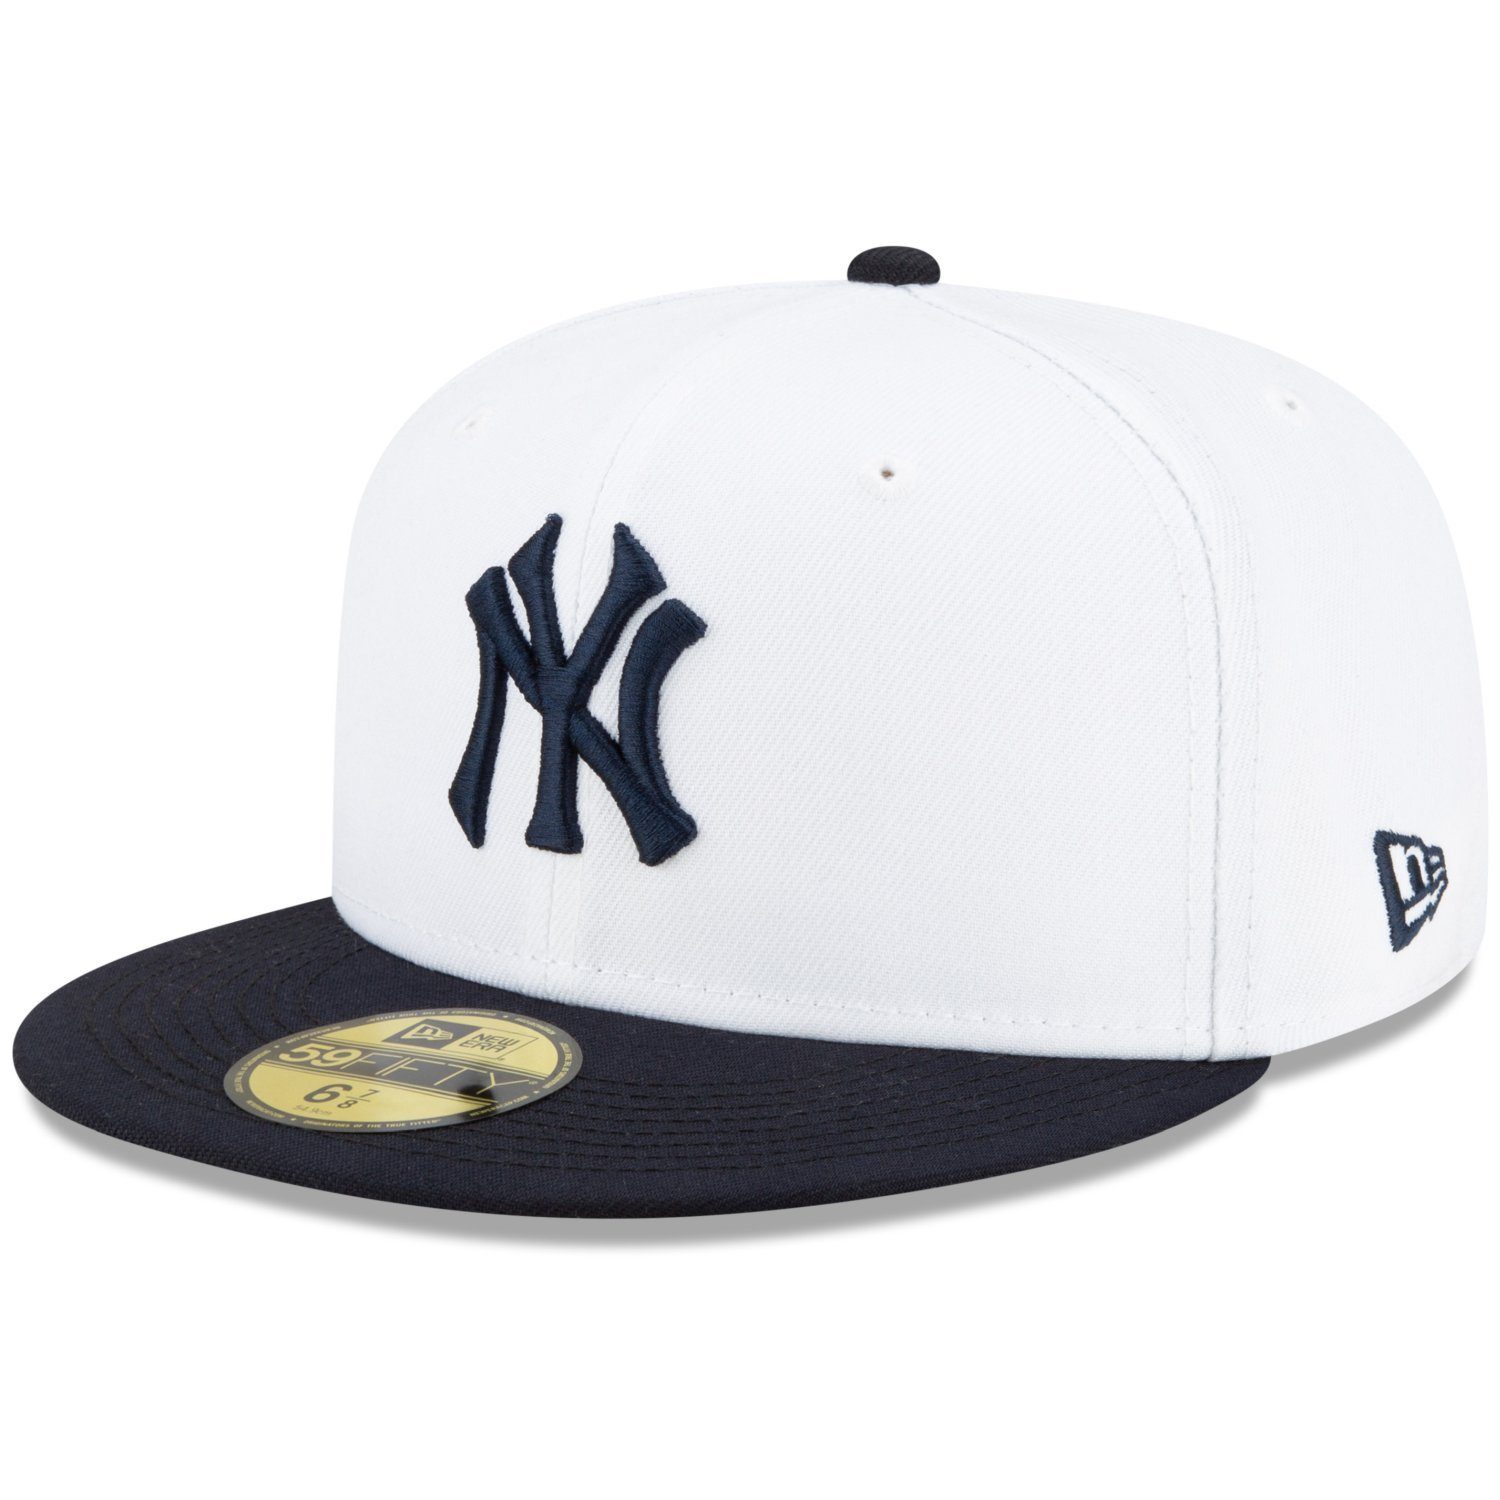 Cap 1975 Era SERIES NY Yankees WORLD New 59Fifty Fitted